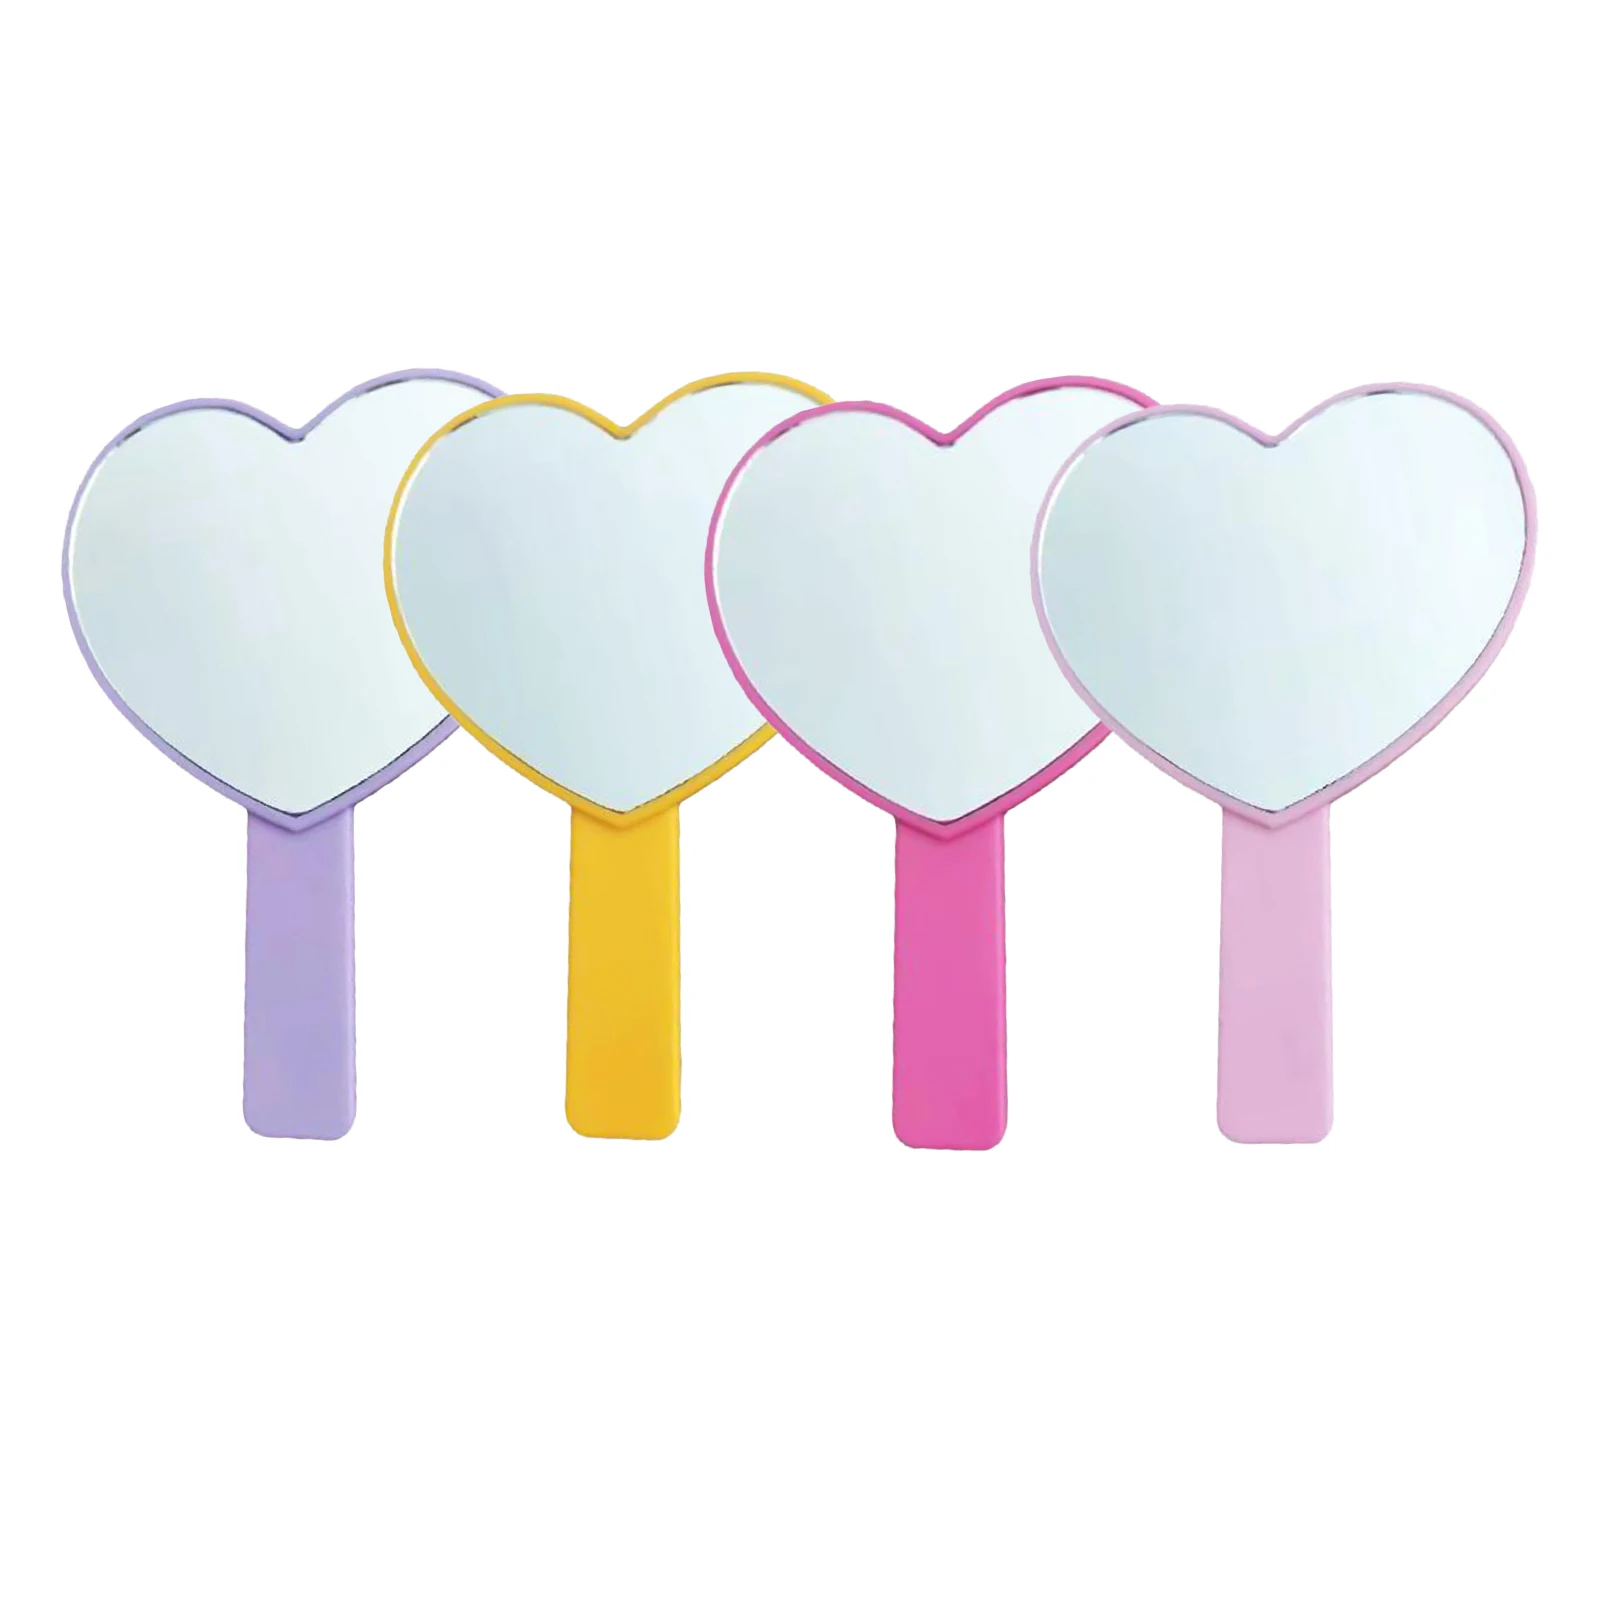 Small Compact Makeup Heart Shaped Mirror with Handle Look Adorable Design